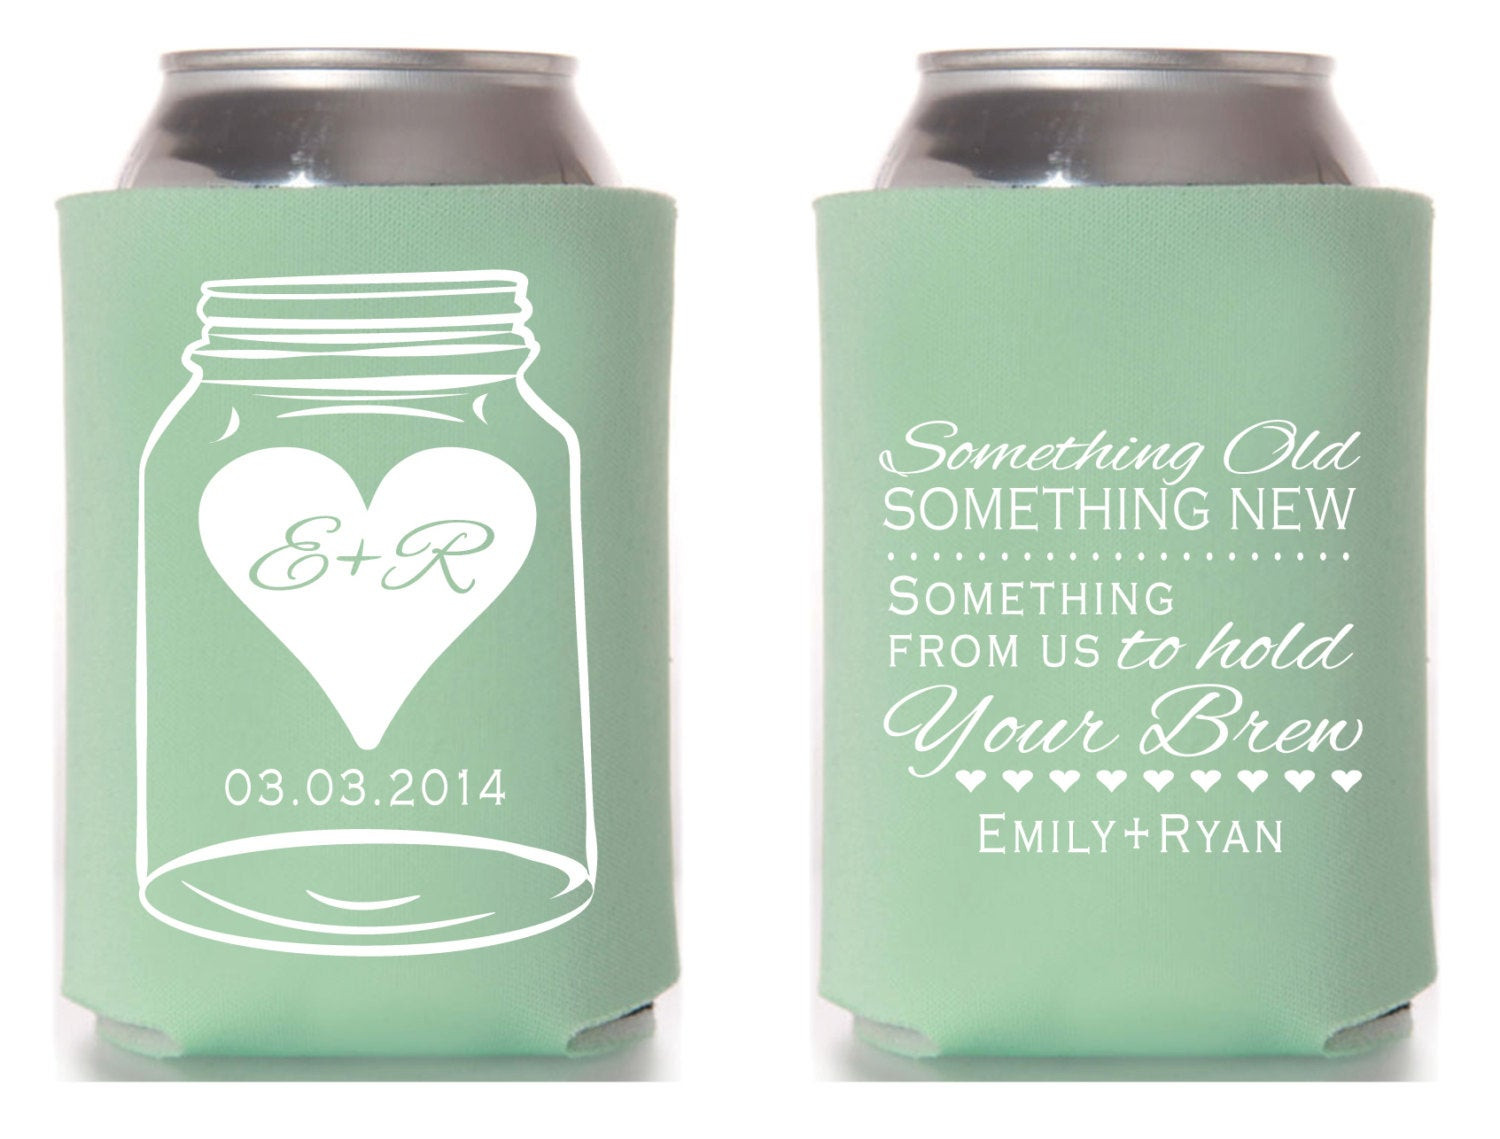 Wedding Favor Koozies Lovely Request A Custom Order And Have Something Made Just For You Of Wedding Favor Koozies 